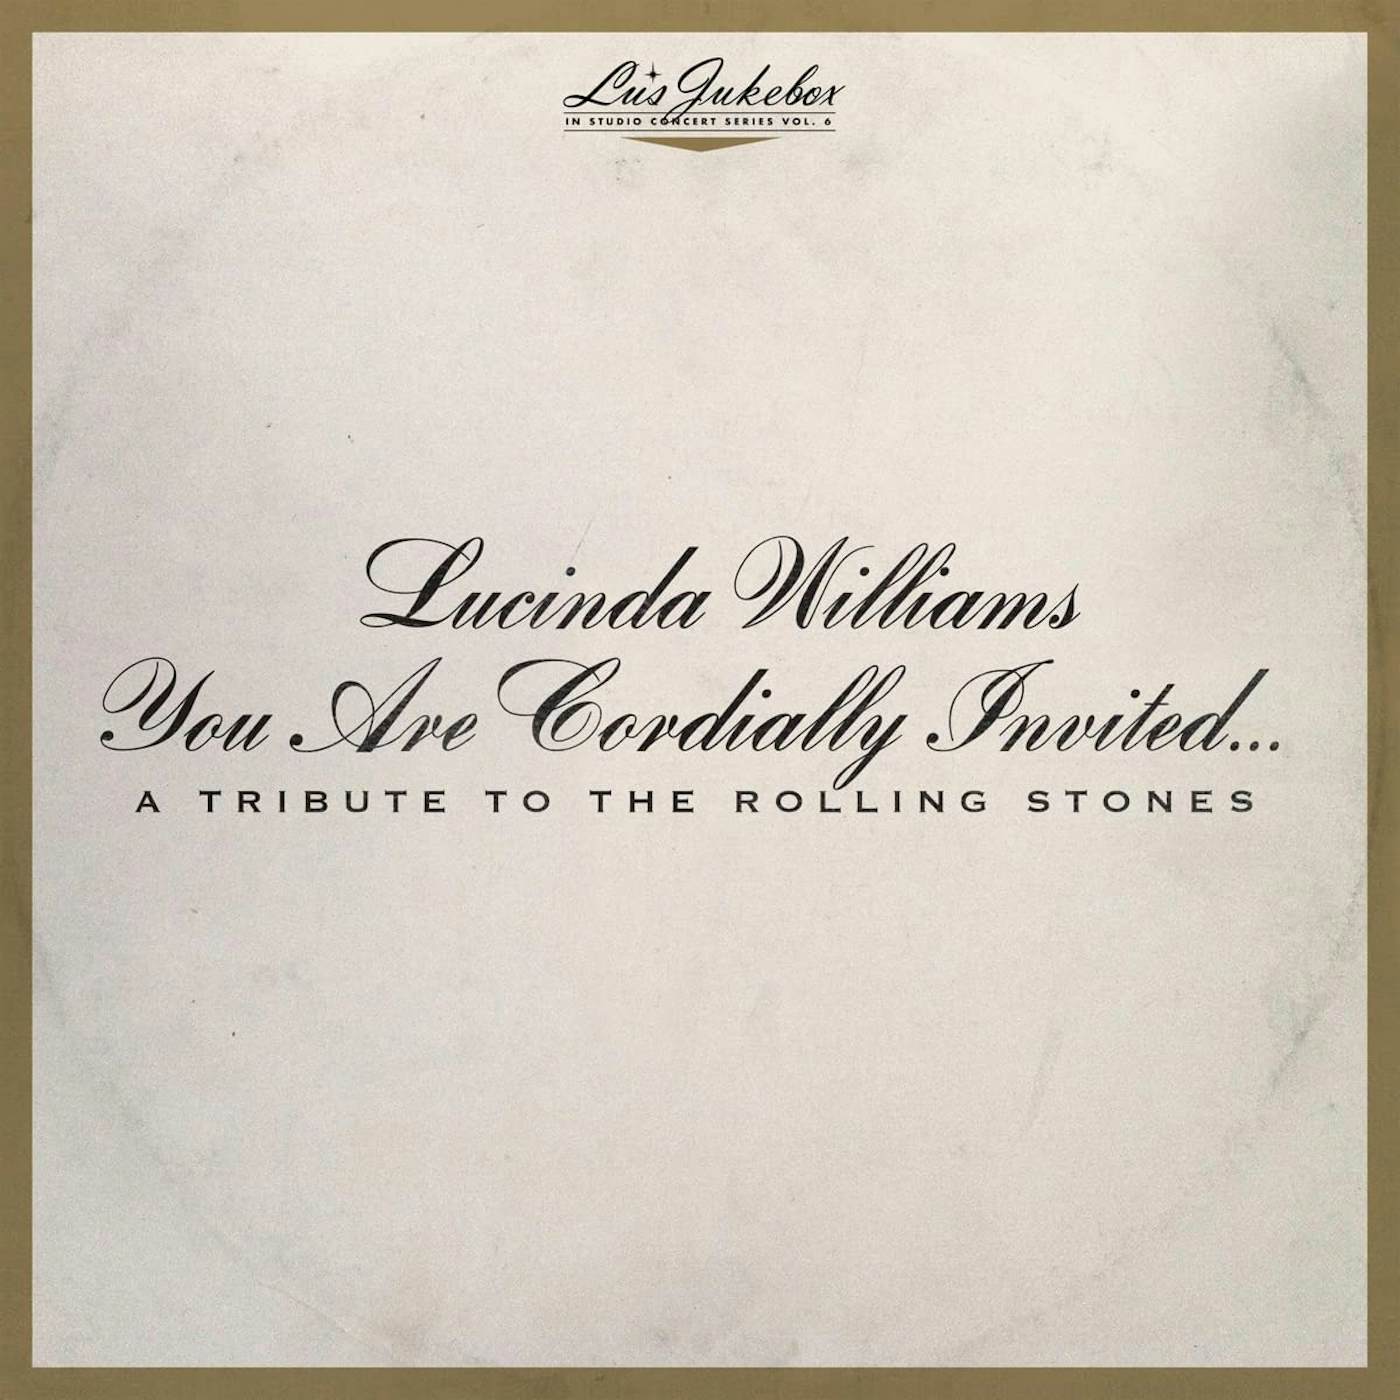 Lucinda Williams LU'S JUKEBOX VOL. 6: YOU ARE CORDIALLY INVITED... A TRIBUTE TO THE ROLLING STONES CD